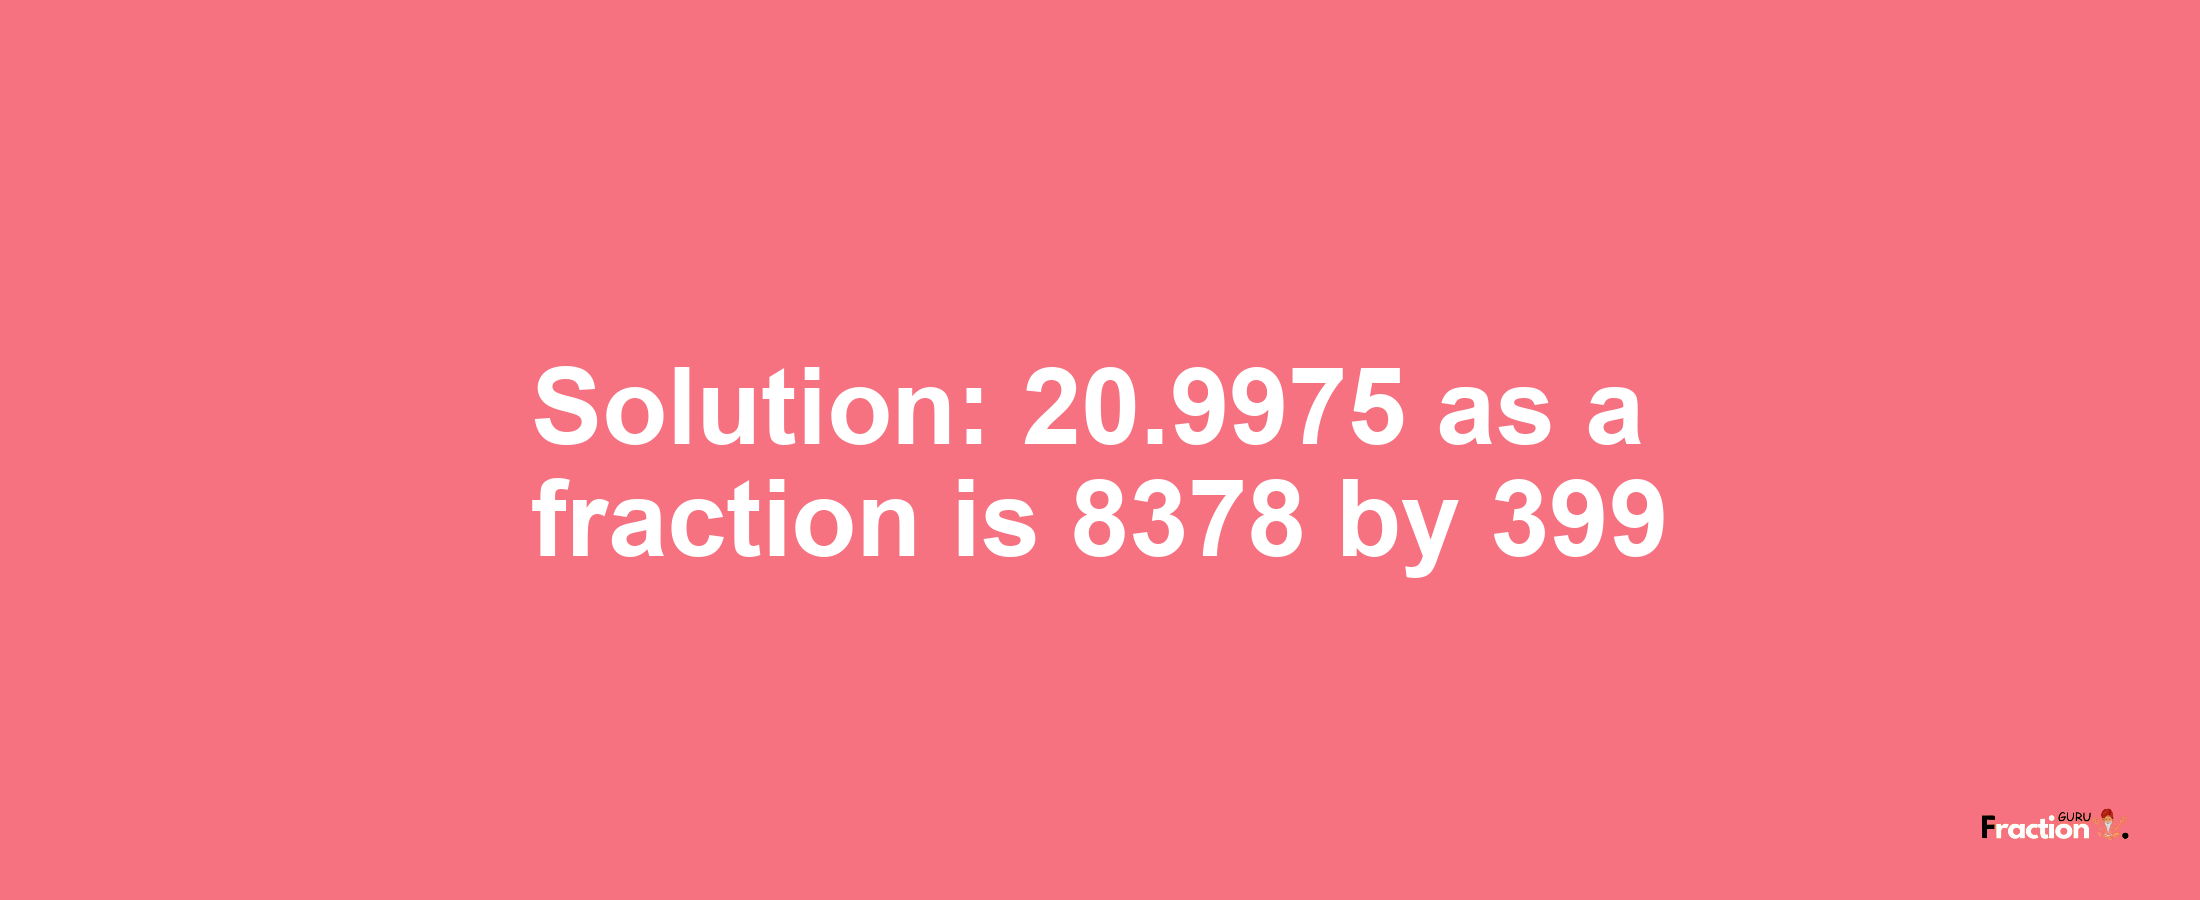 Solution:20.9975 as a fraction is 8378/399